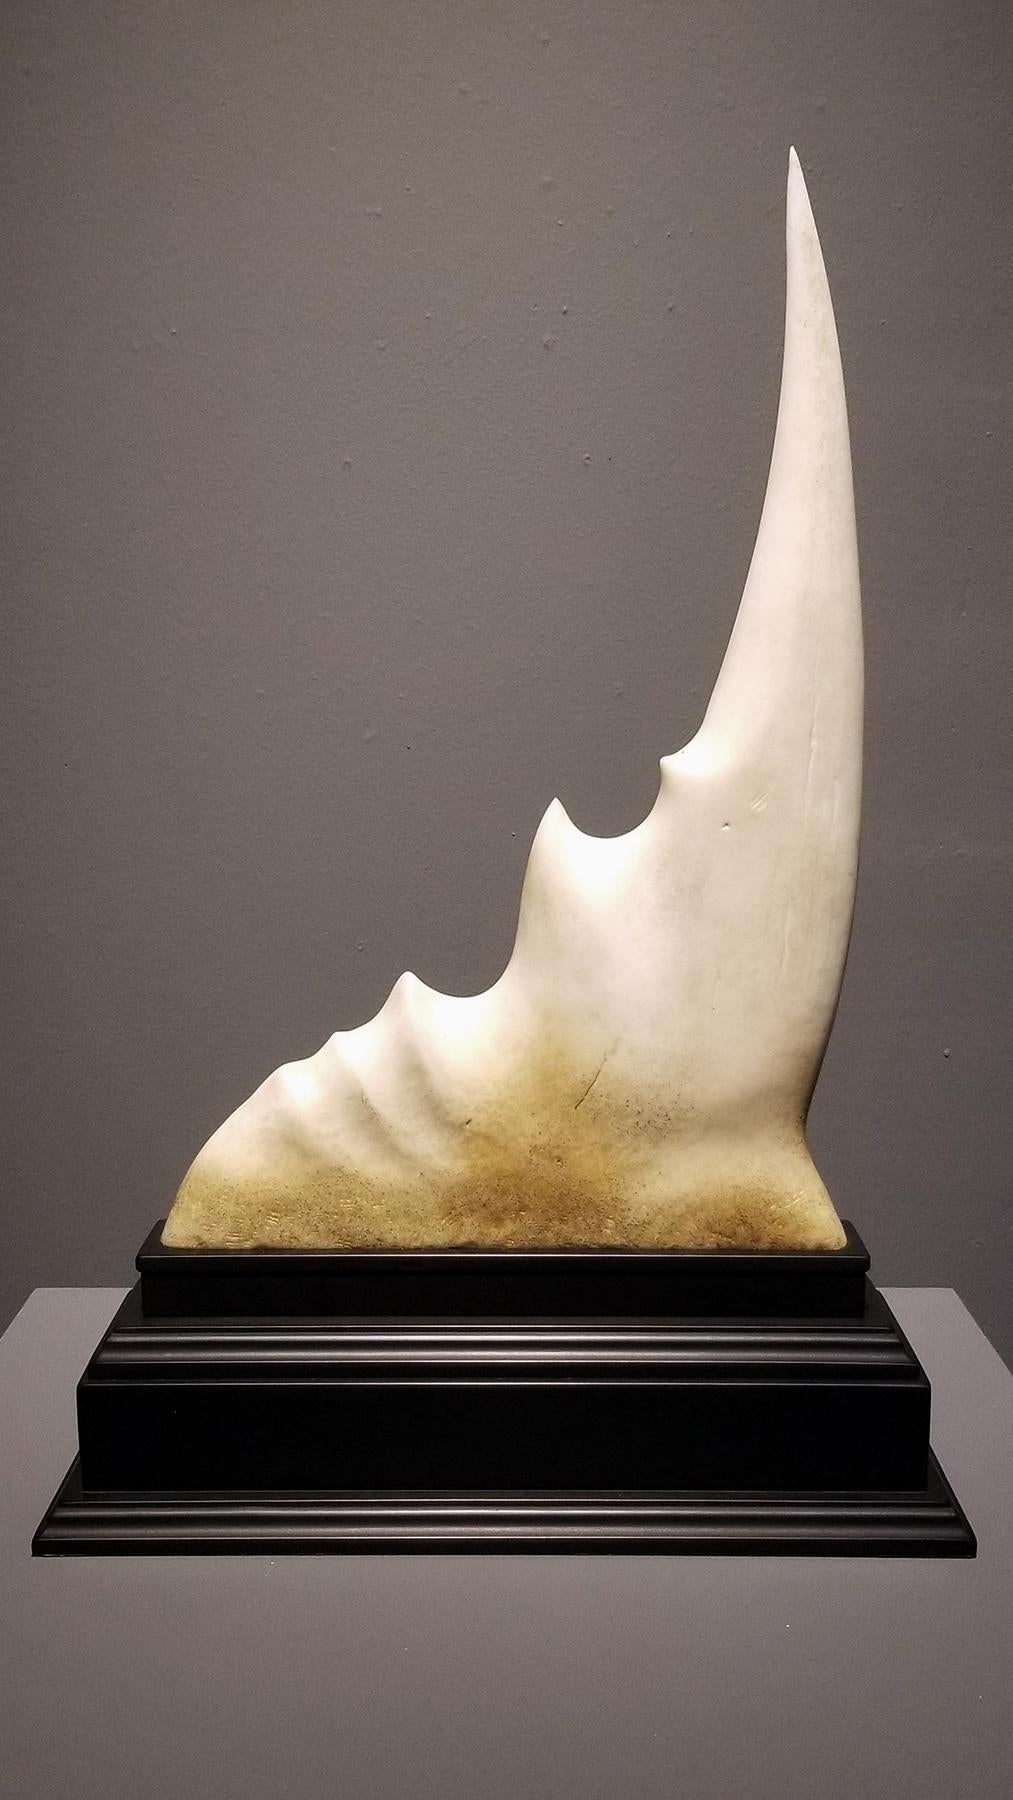 An original sculpture by Austin, TX based artist Steve Brudniak.

STEVE BRUDNIAK
Tusk of the Solipsisaur (Study for Ontological Catastrophe), 2019
Carved and treated ABS and phenolic plastic
21 x 15 x 5 in

Steve Brudniak is an American contemporary